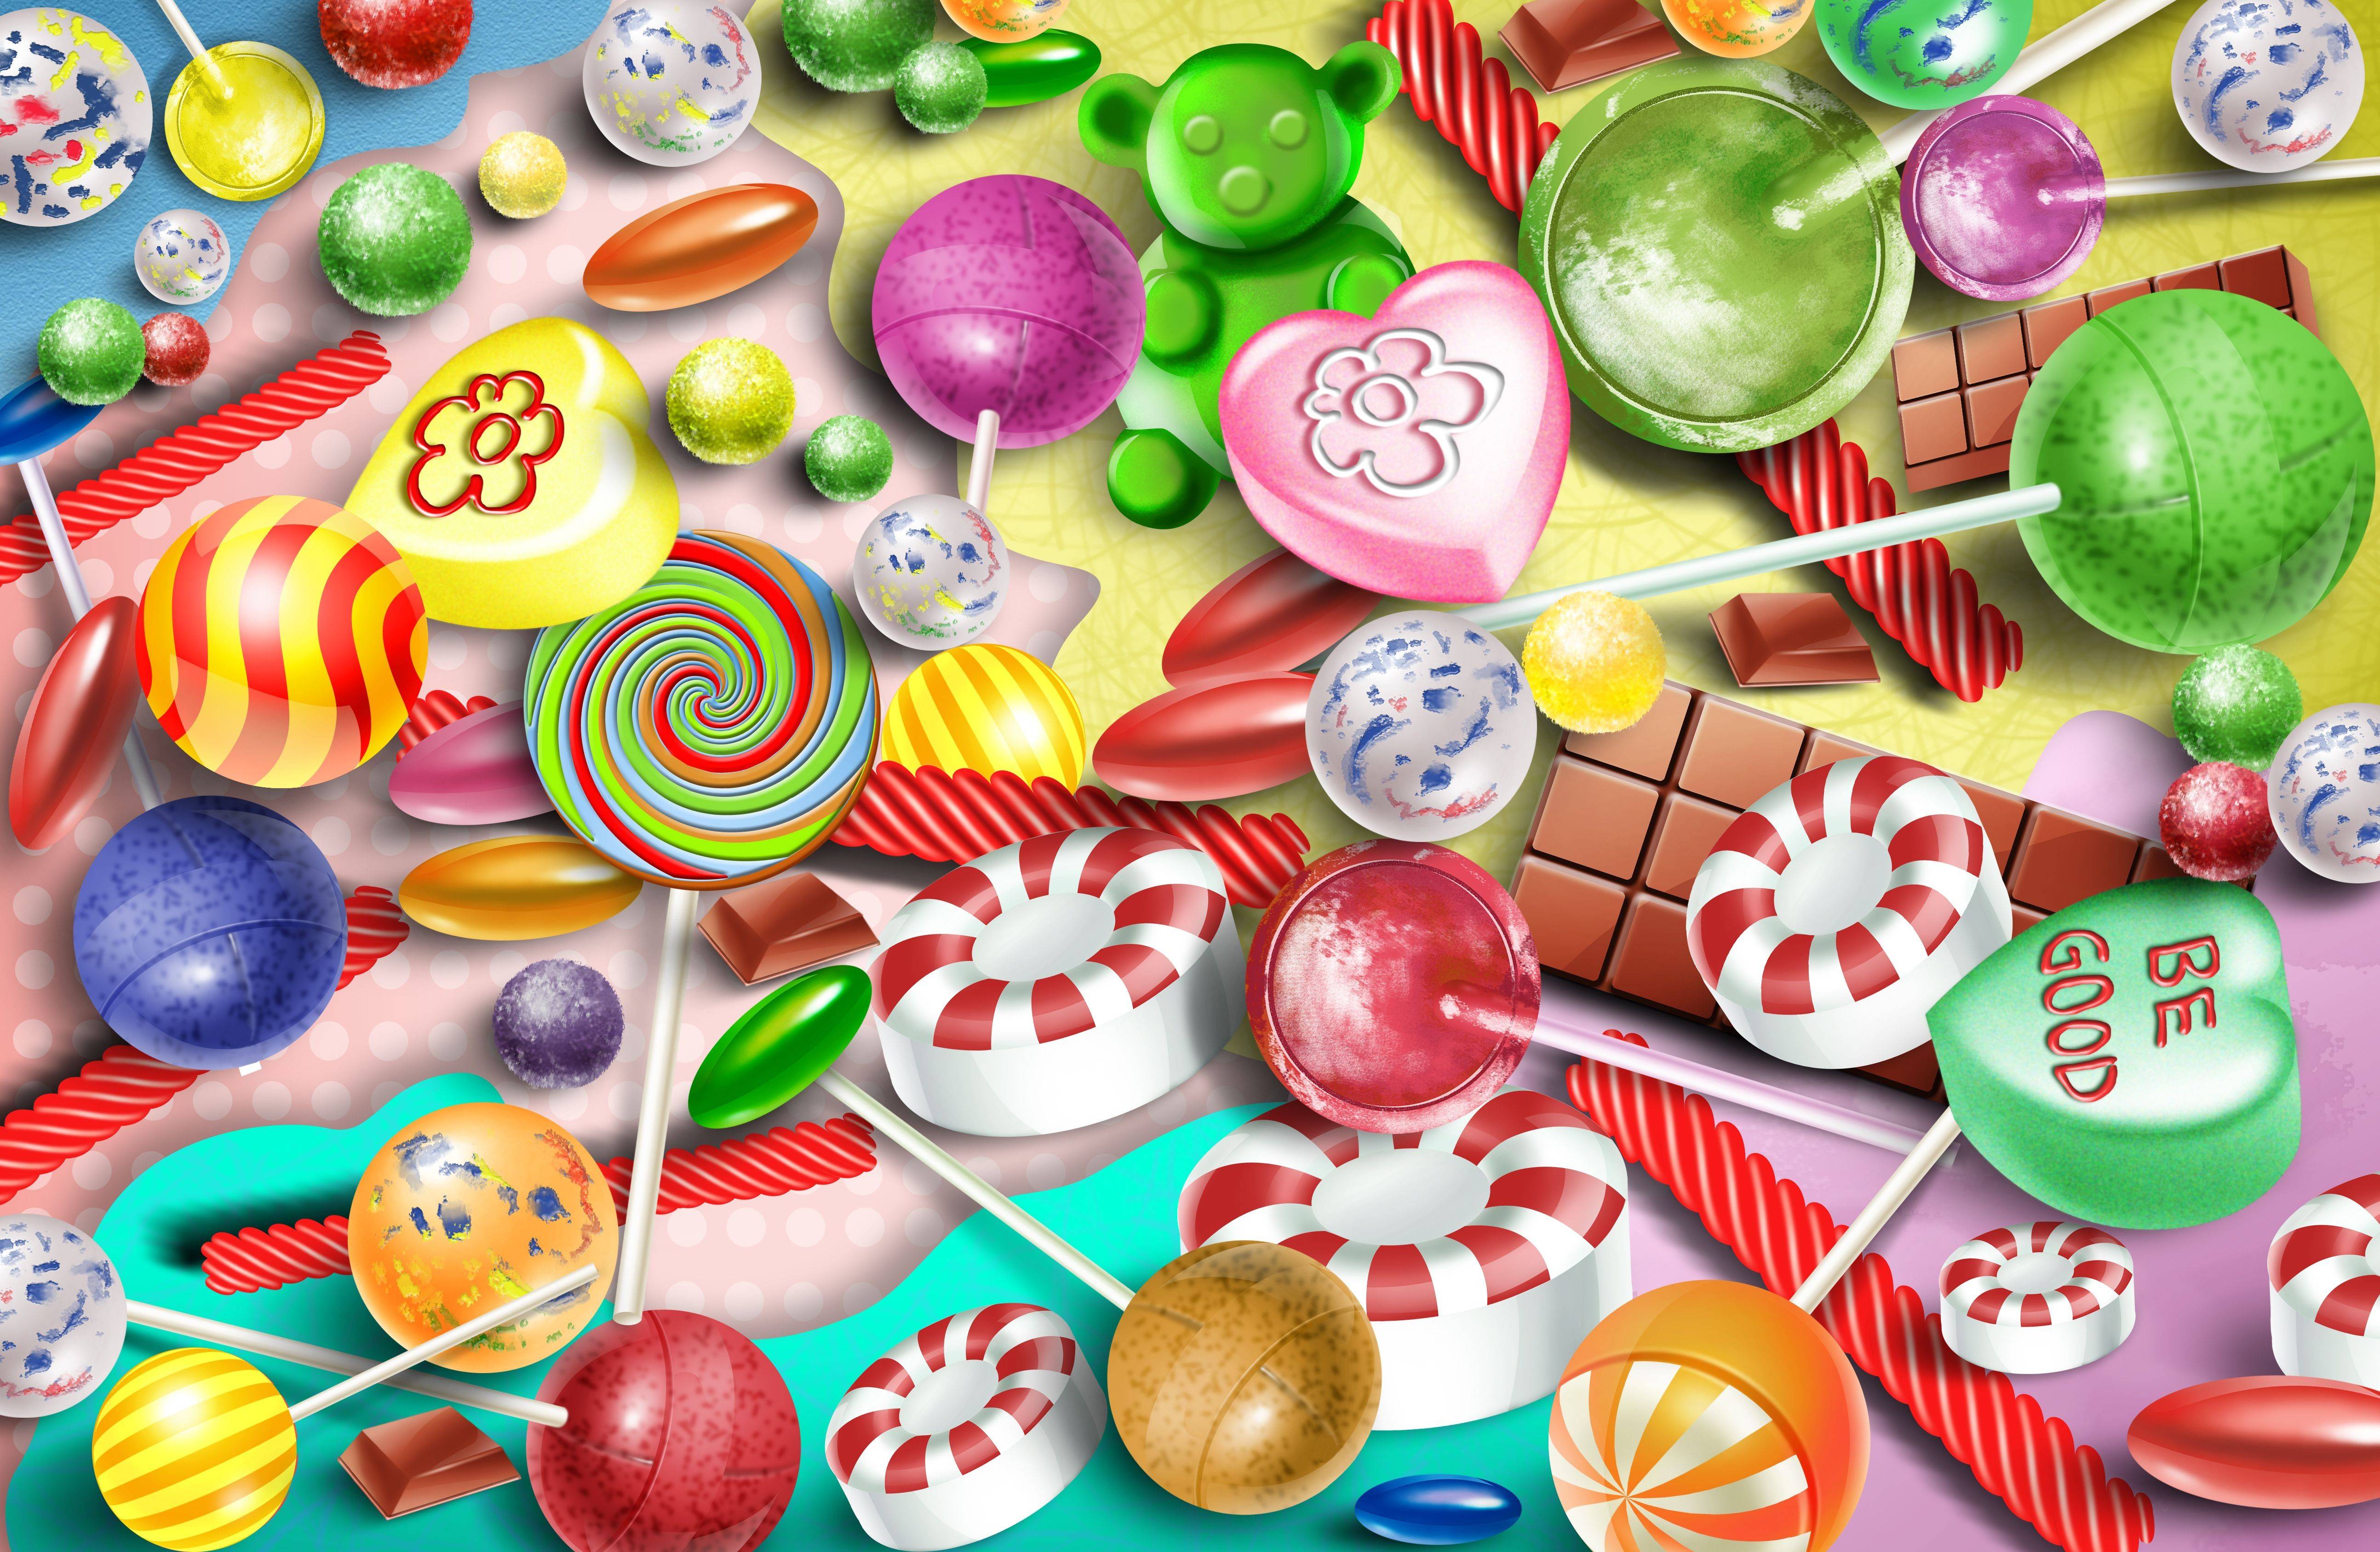 Candy Wallpapers Wallpaper Cave